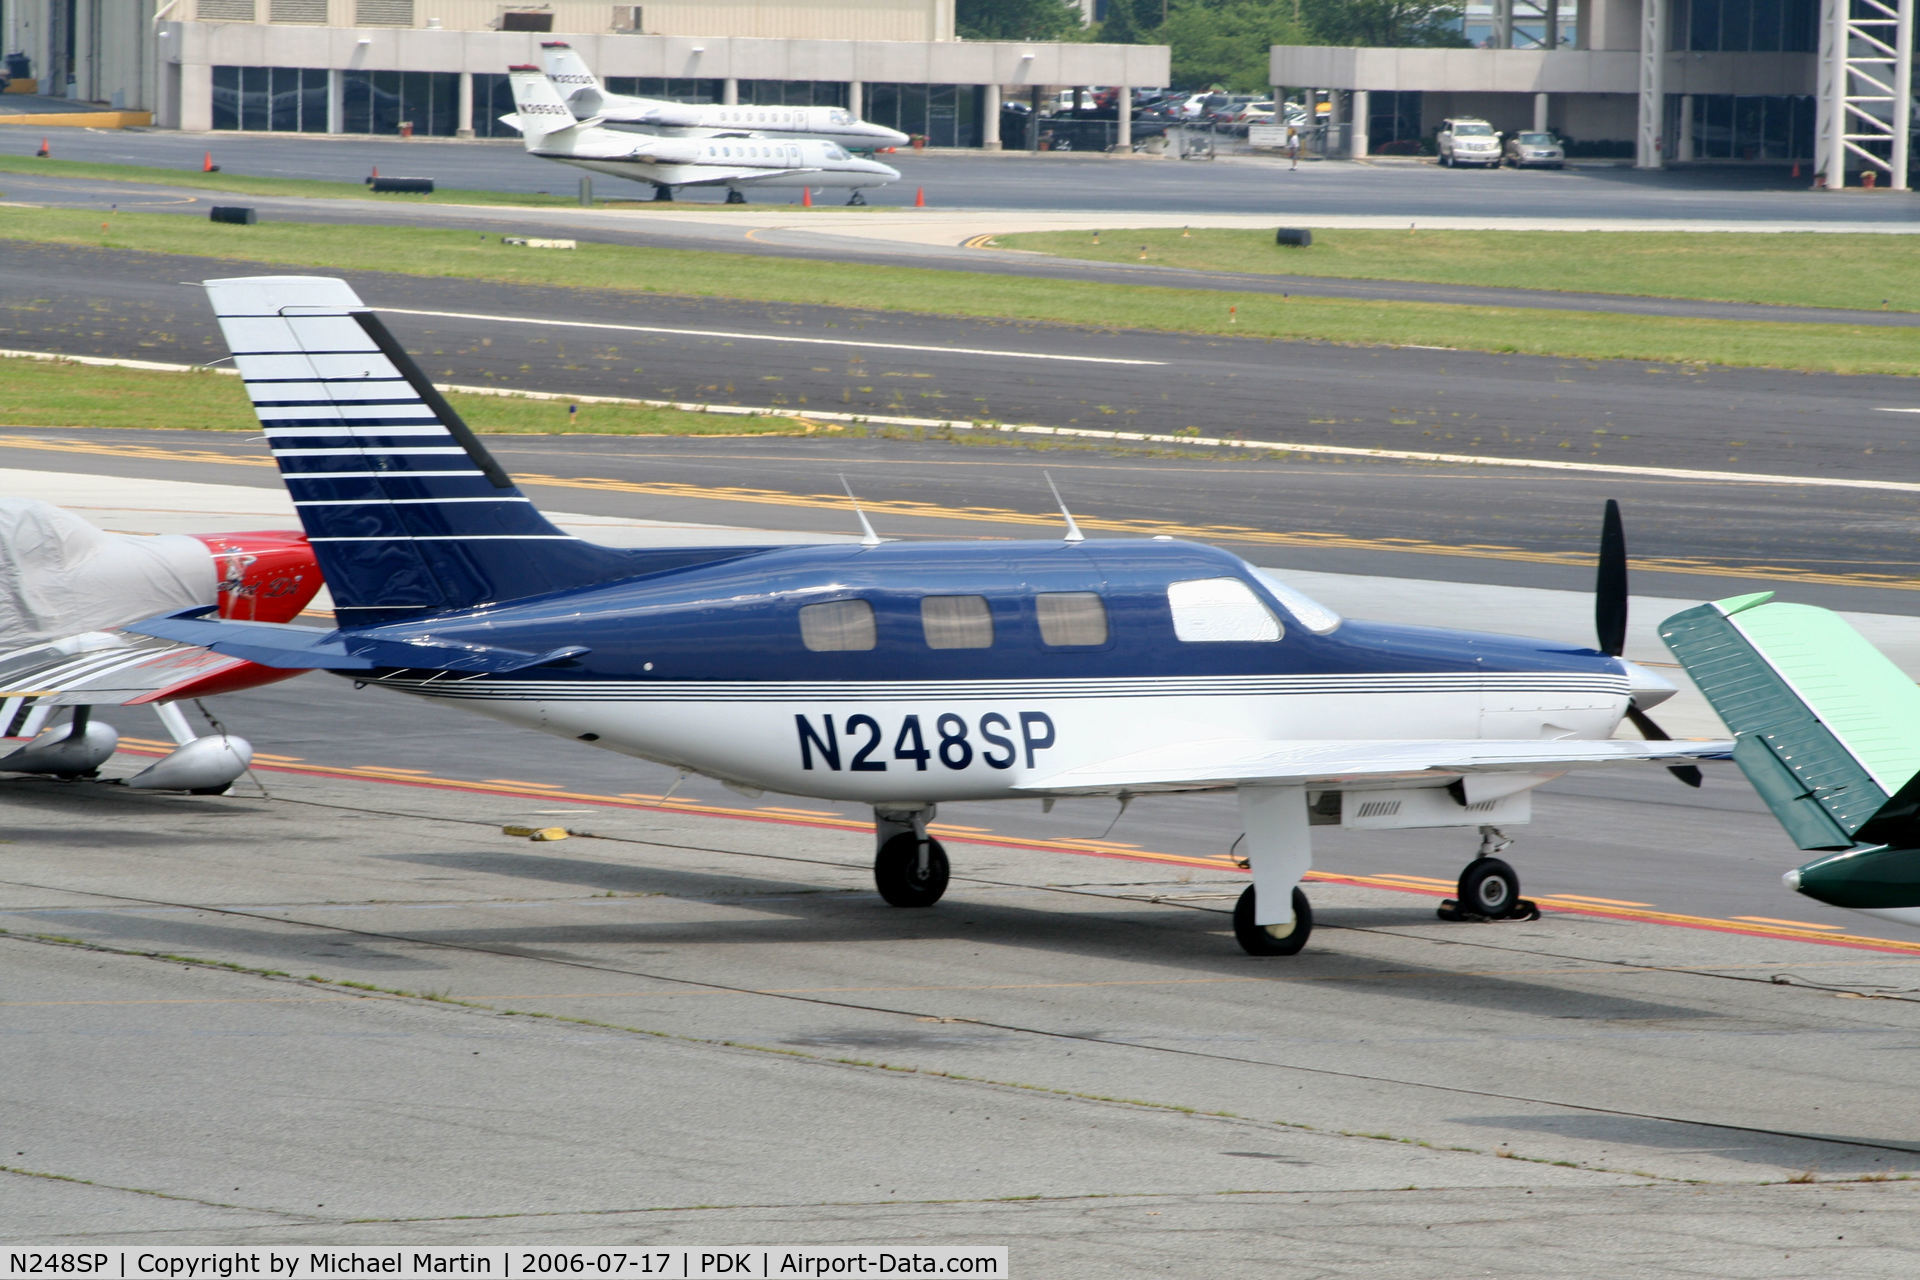 N248SP, 1986 Piper PA-46-310P Malibu C/N 46-8608024, Tied down @ Epps with other aircraft